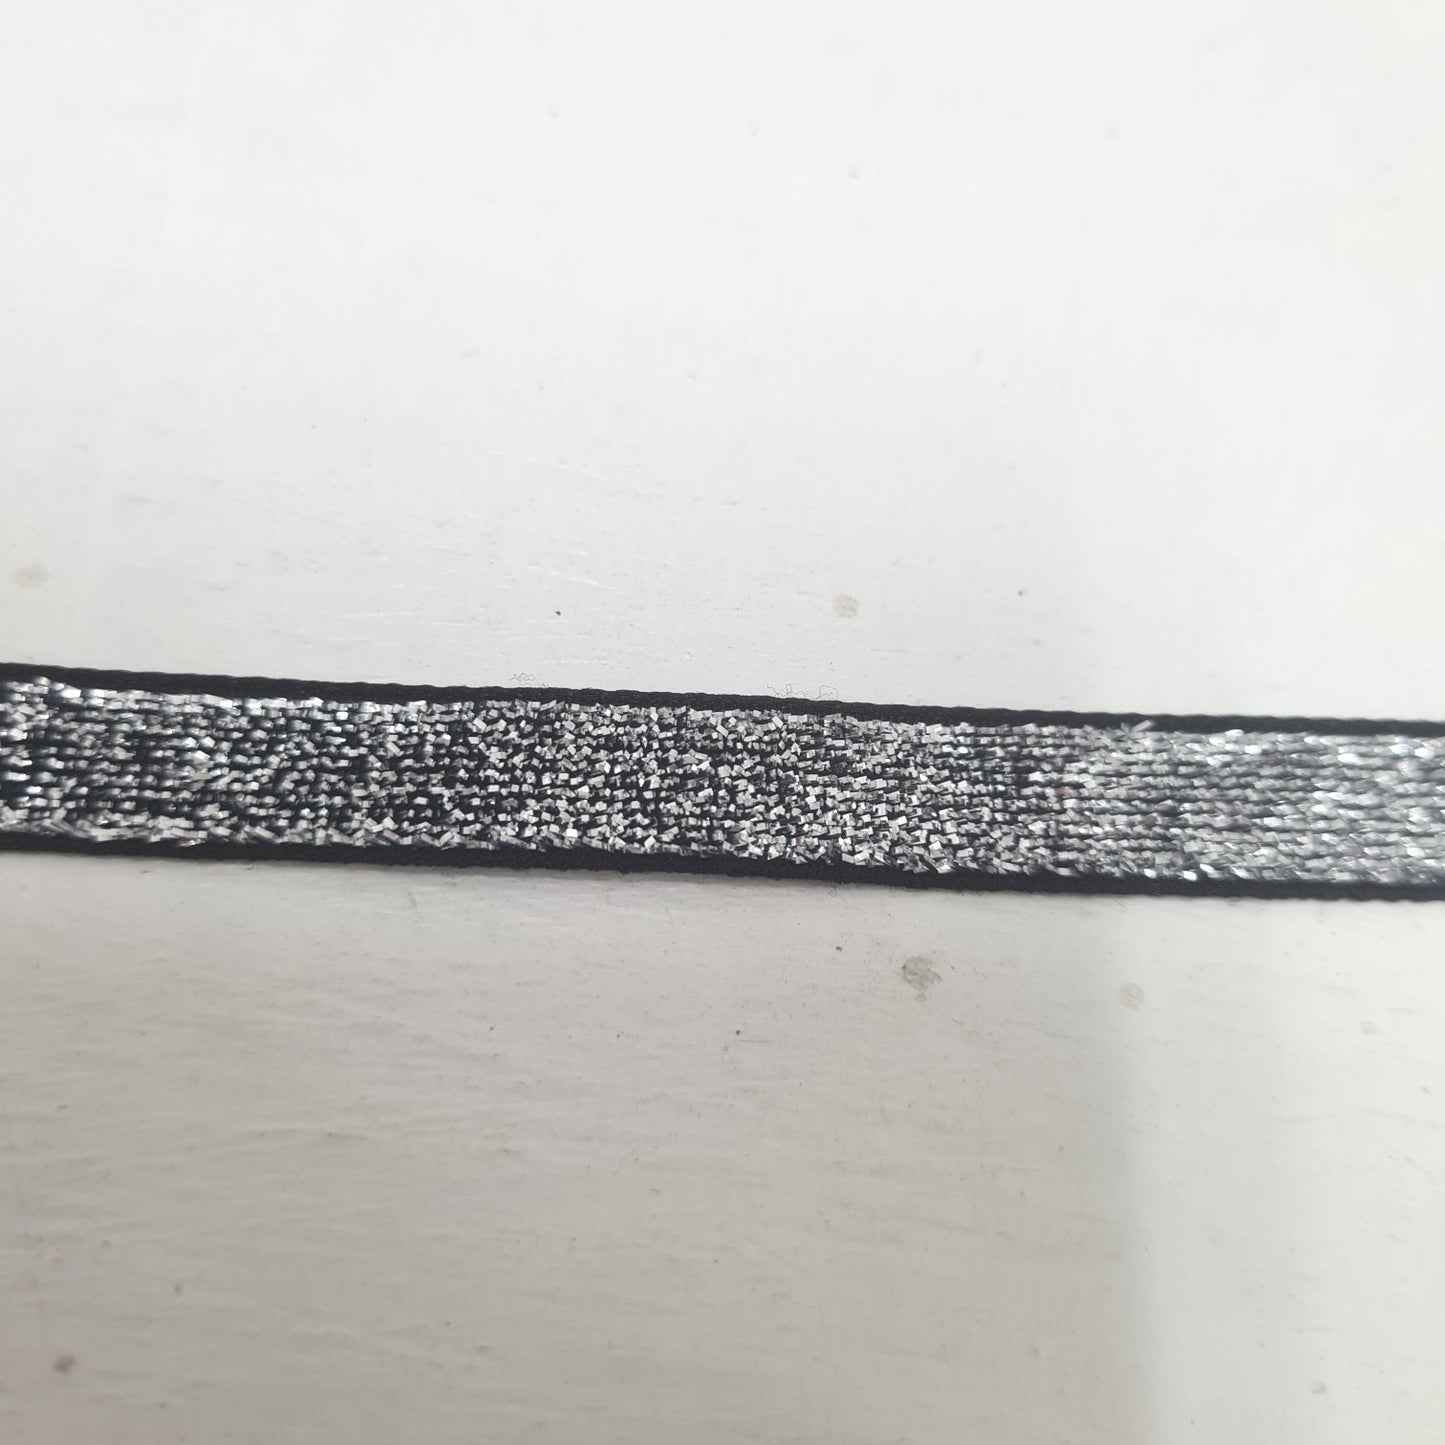 Silver and Black Sparkly Ribbon